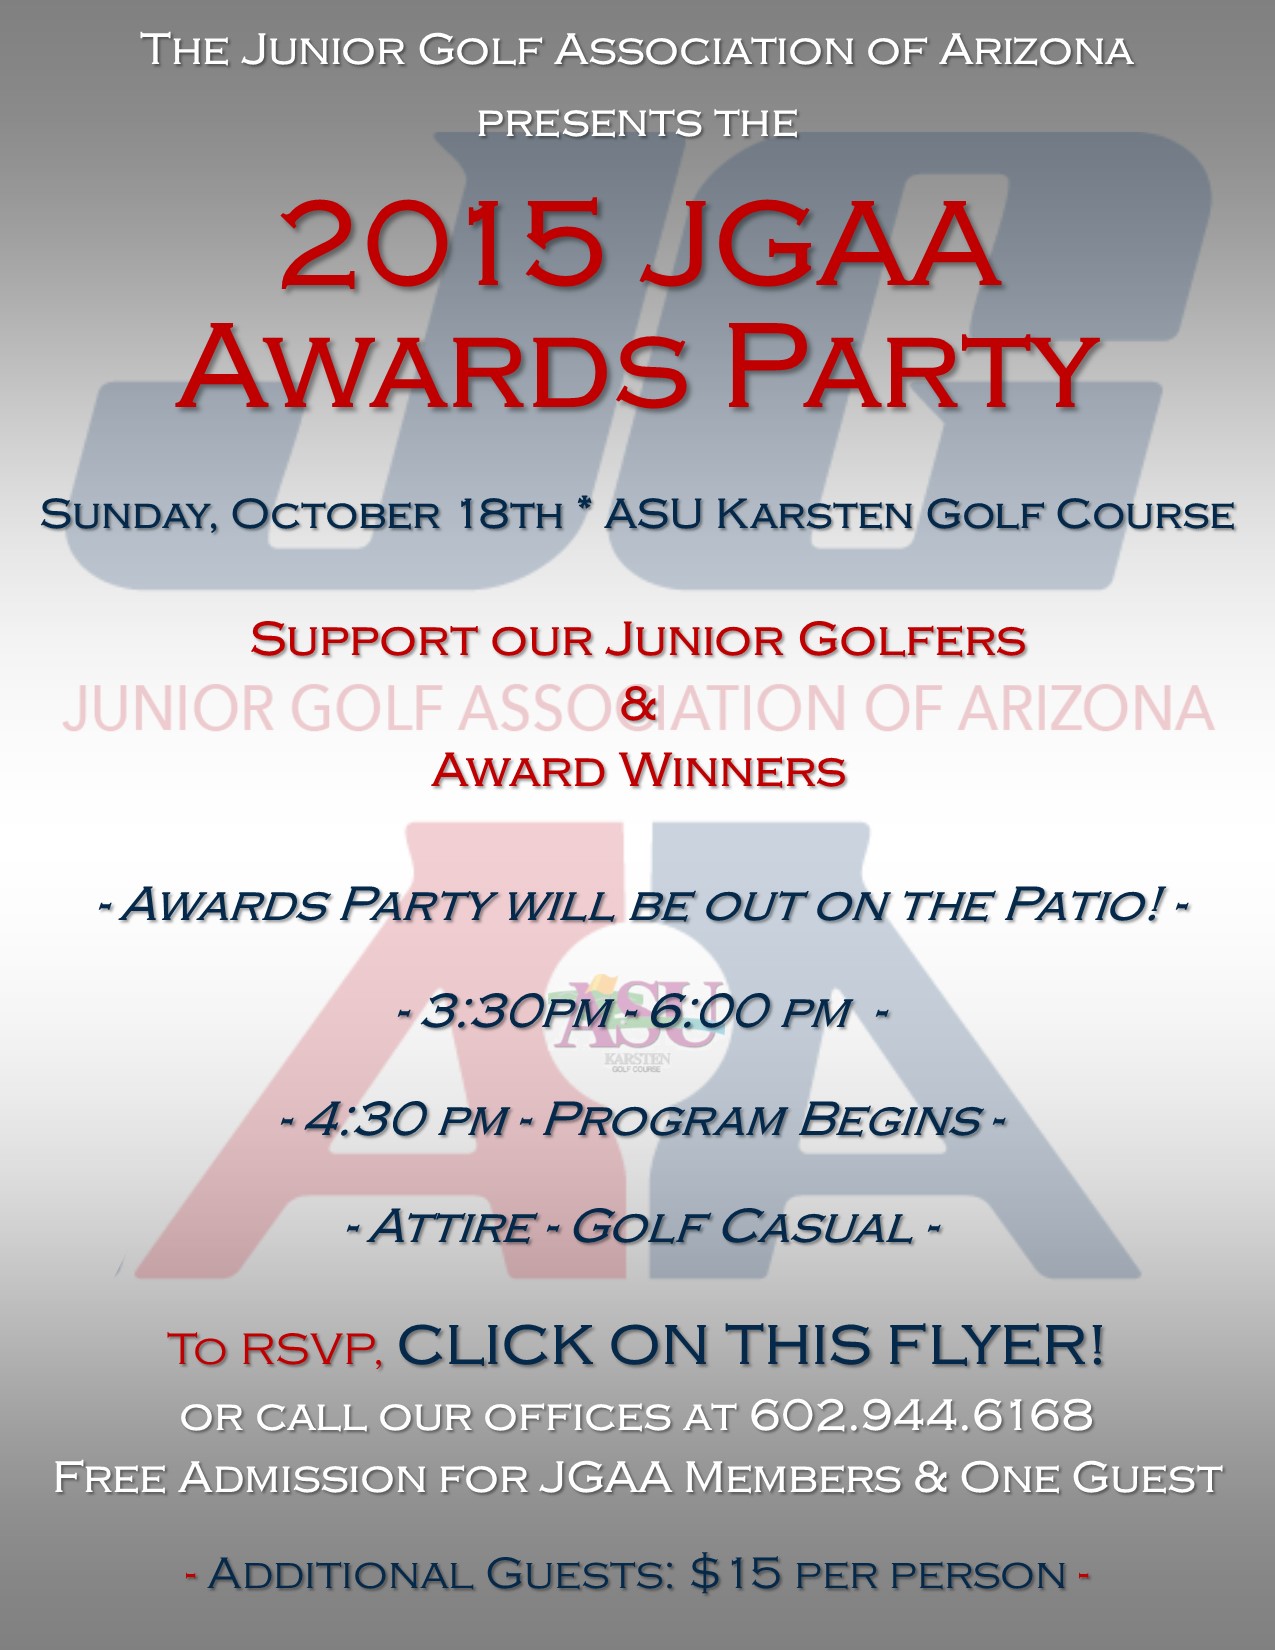 website_flyer_for_awards_party_2015